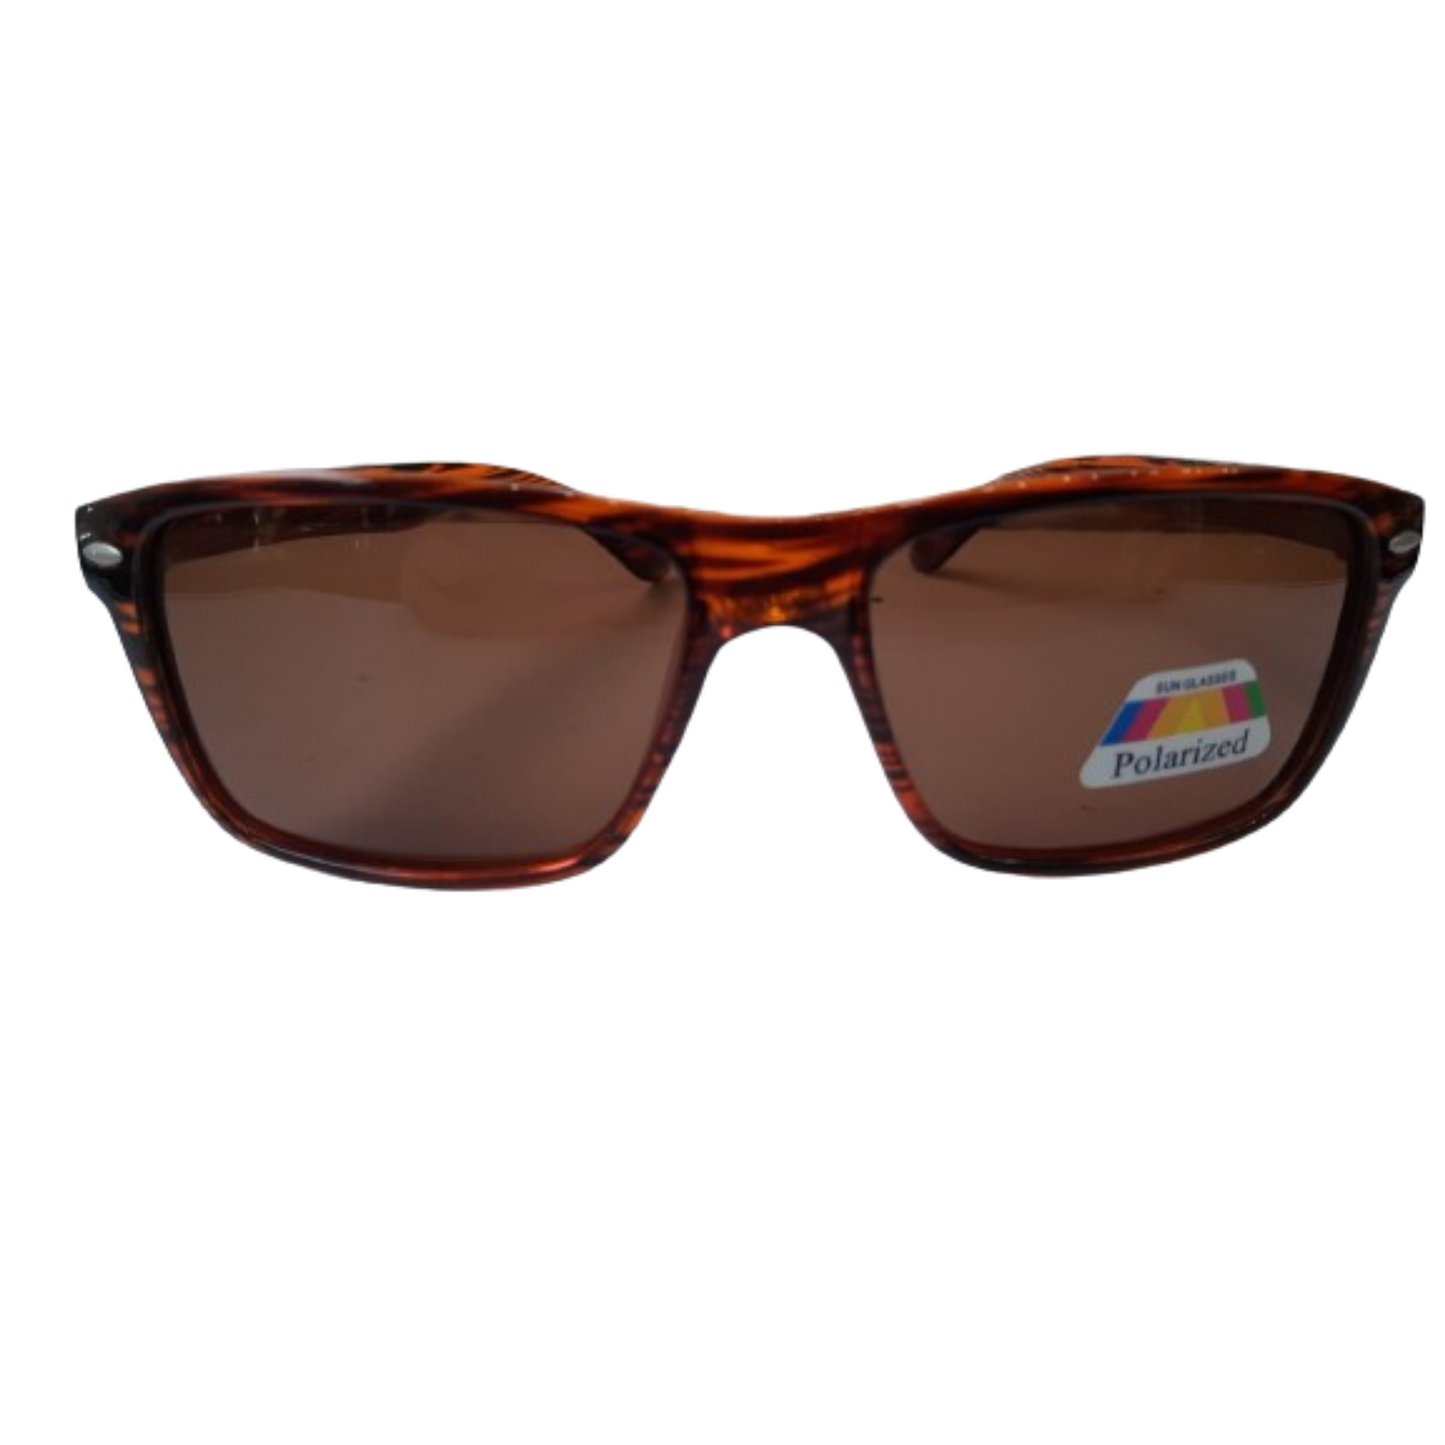 Vintage Brown Sunglasses for Women